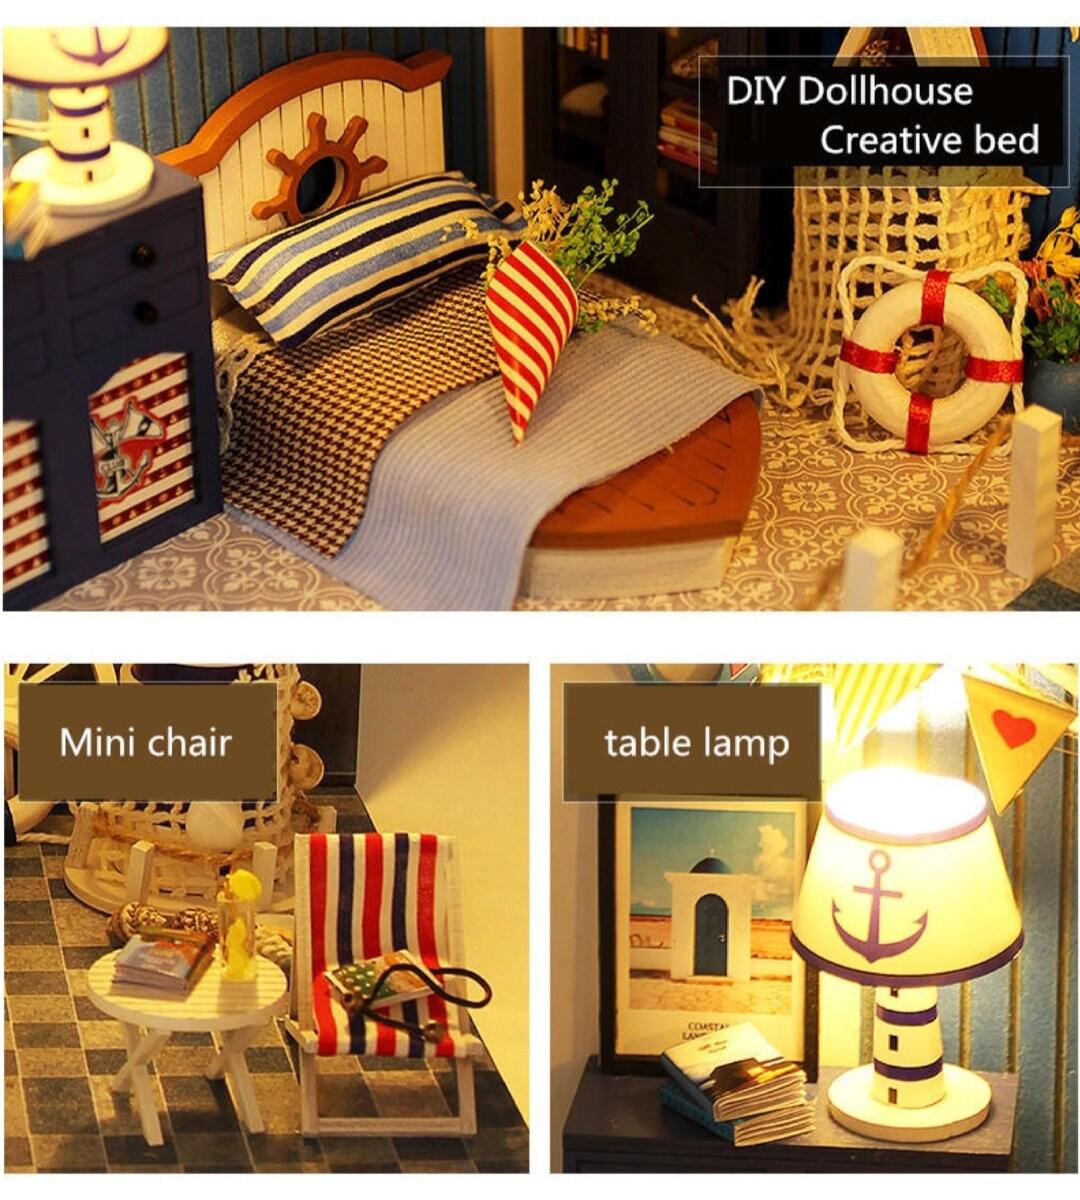 Sea Dreams Beach Dollhouse Miniature Bedroom with Lighthouse, Marine Theme DIY Dollhouse Kit With Free Dust Cover and Remote Control Lights - Rajbharti Crafts